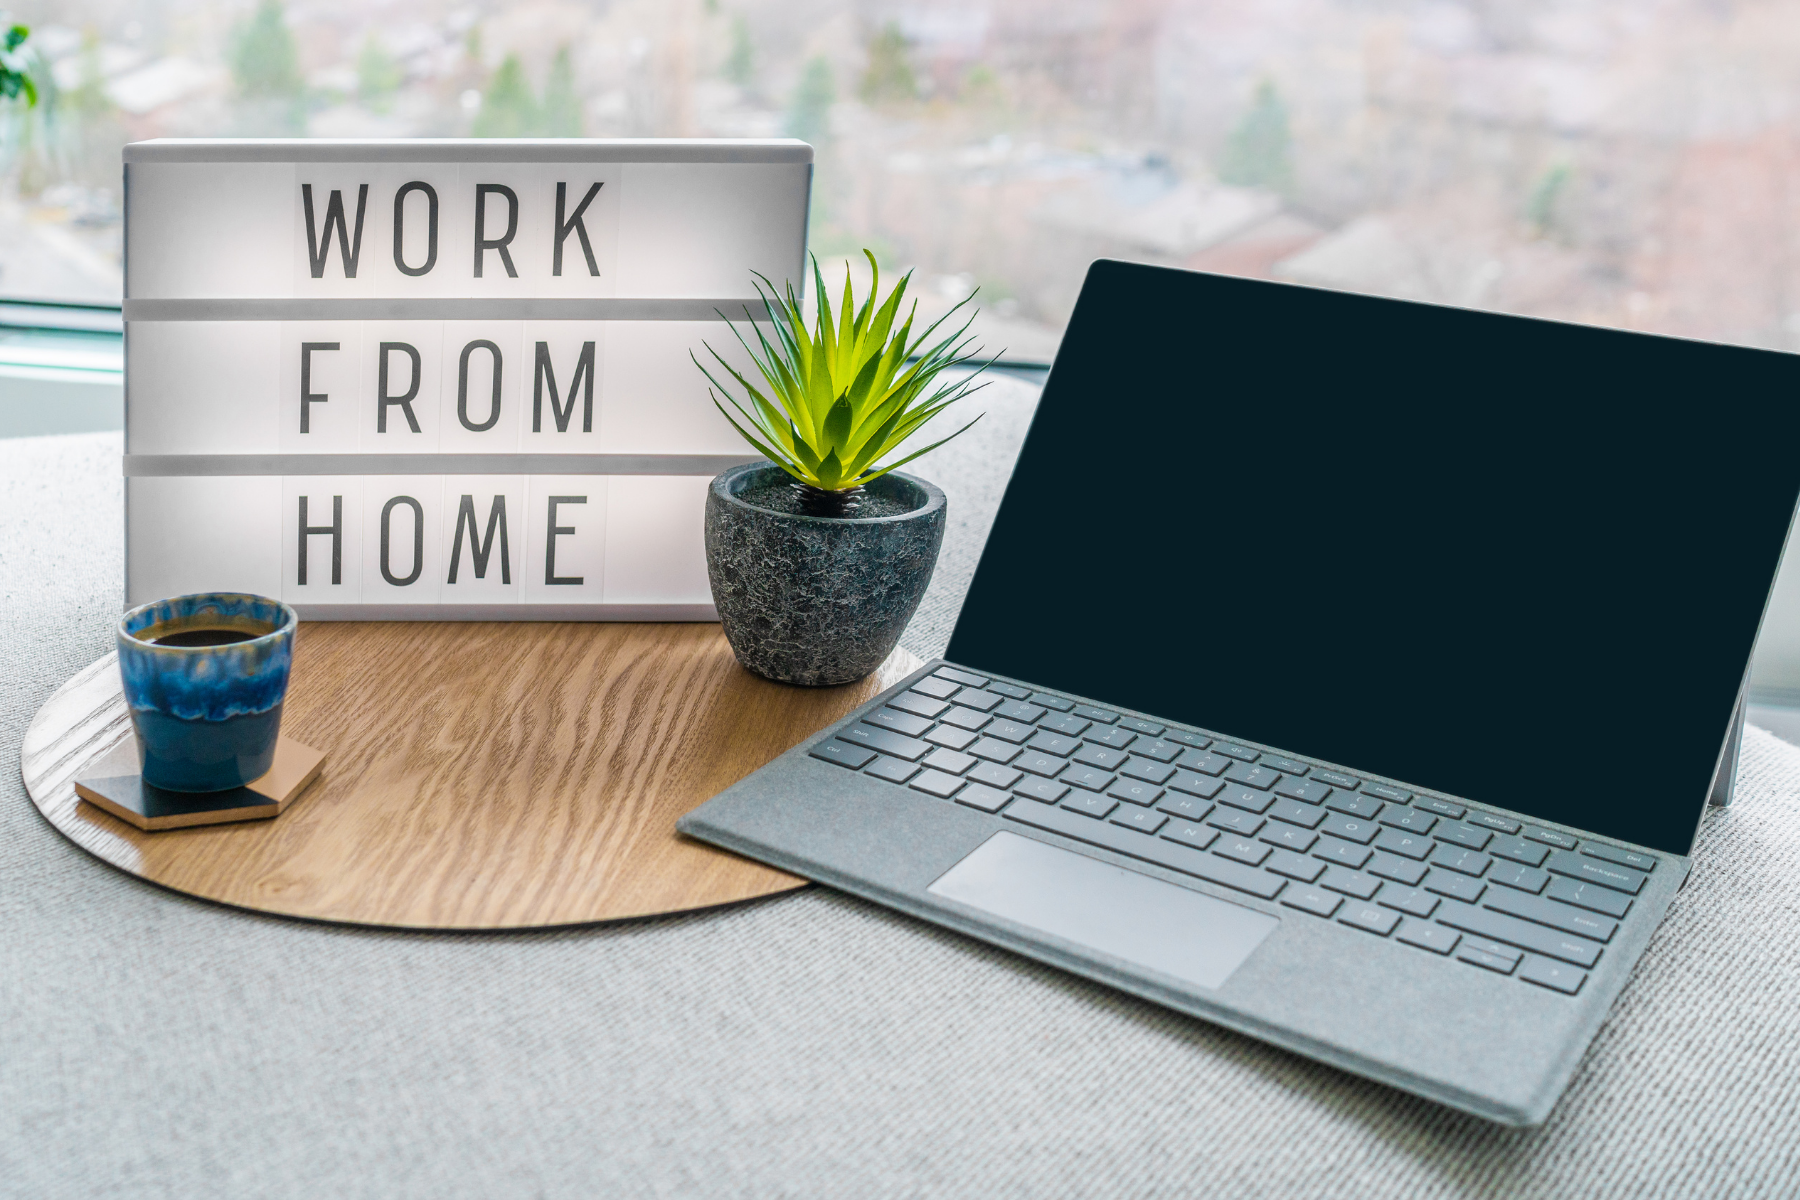 Working from Home: Tips from the Experts